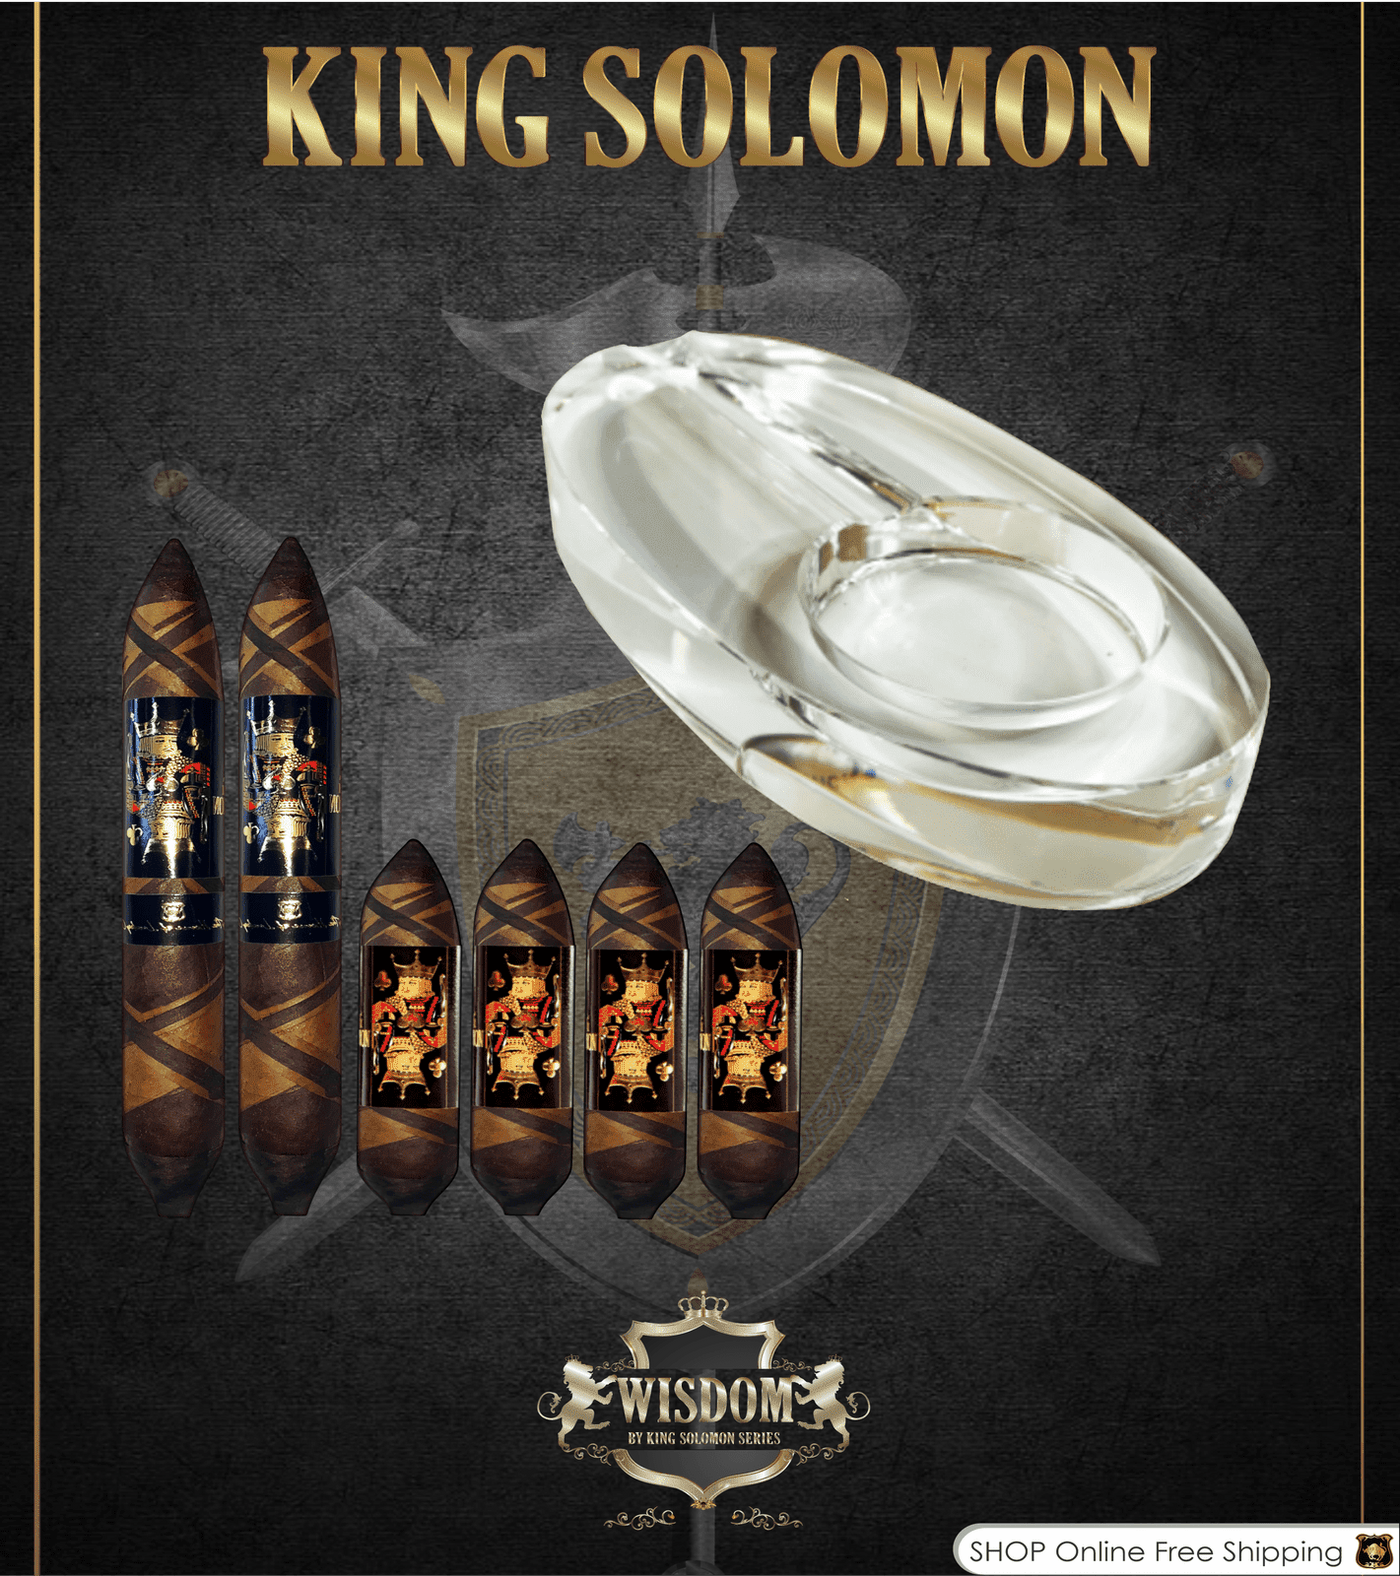 Wisdom 4x60 Cigar From The King Solomon Series: Set of 4 and 2 King Solomon 7x58 Cigar with Ashtray